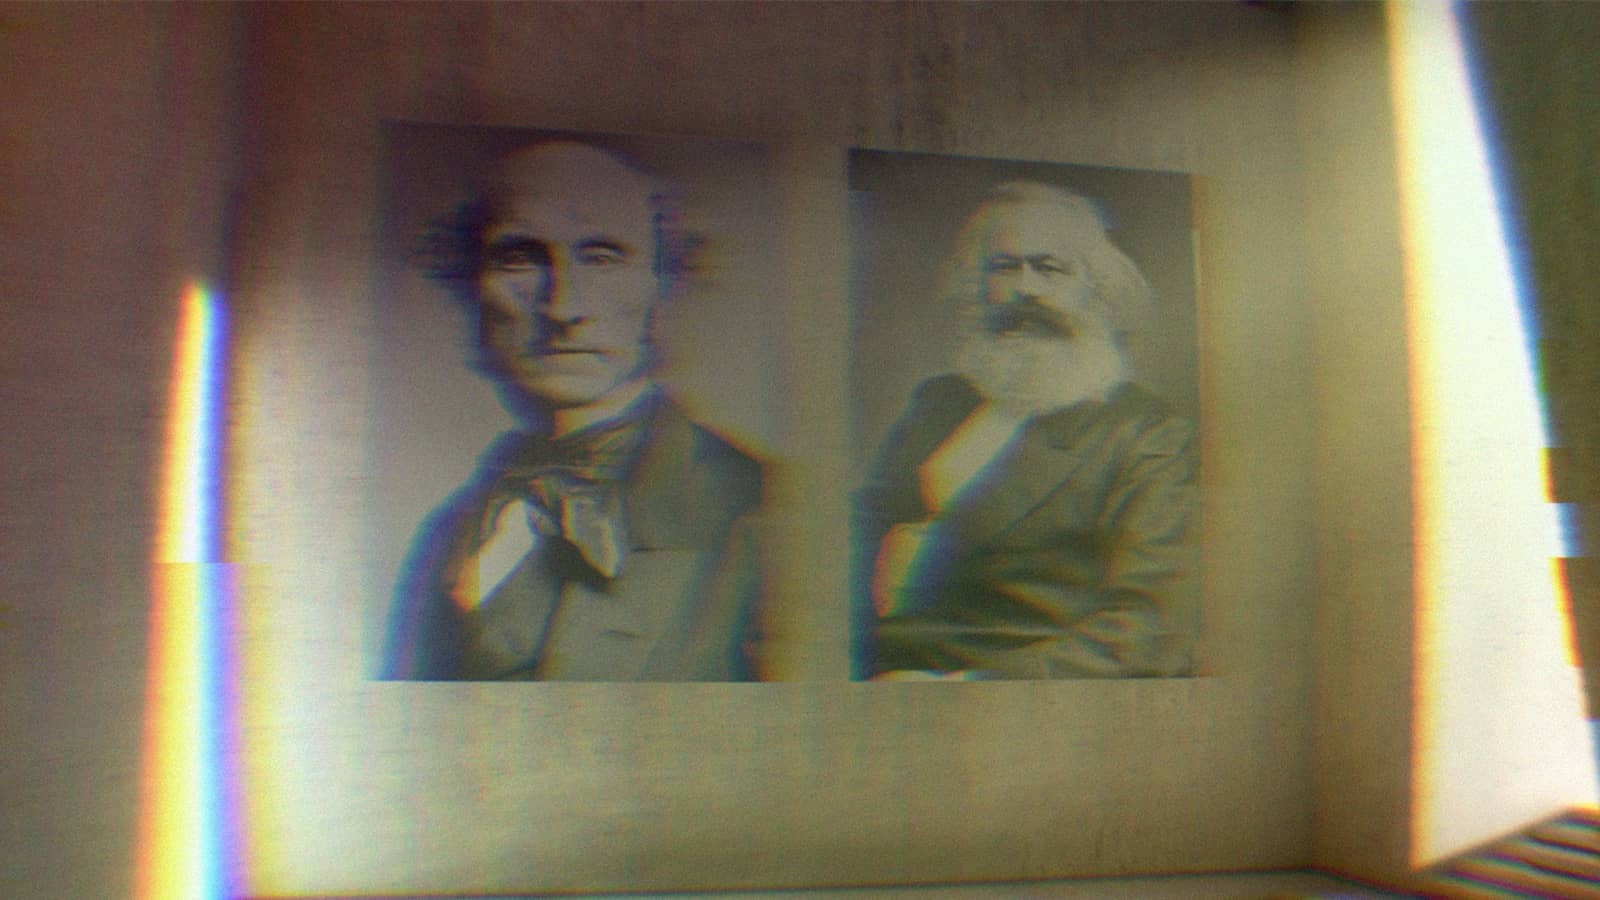 Portraits of Karl Marx and John Stuart Mill in a gallery.